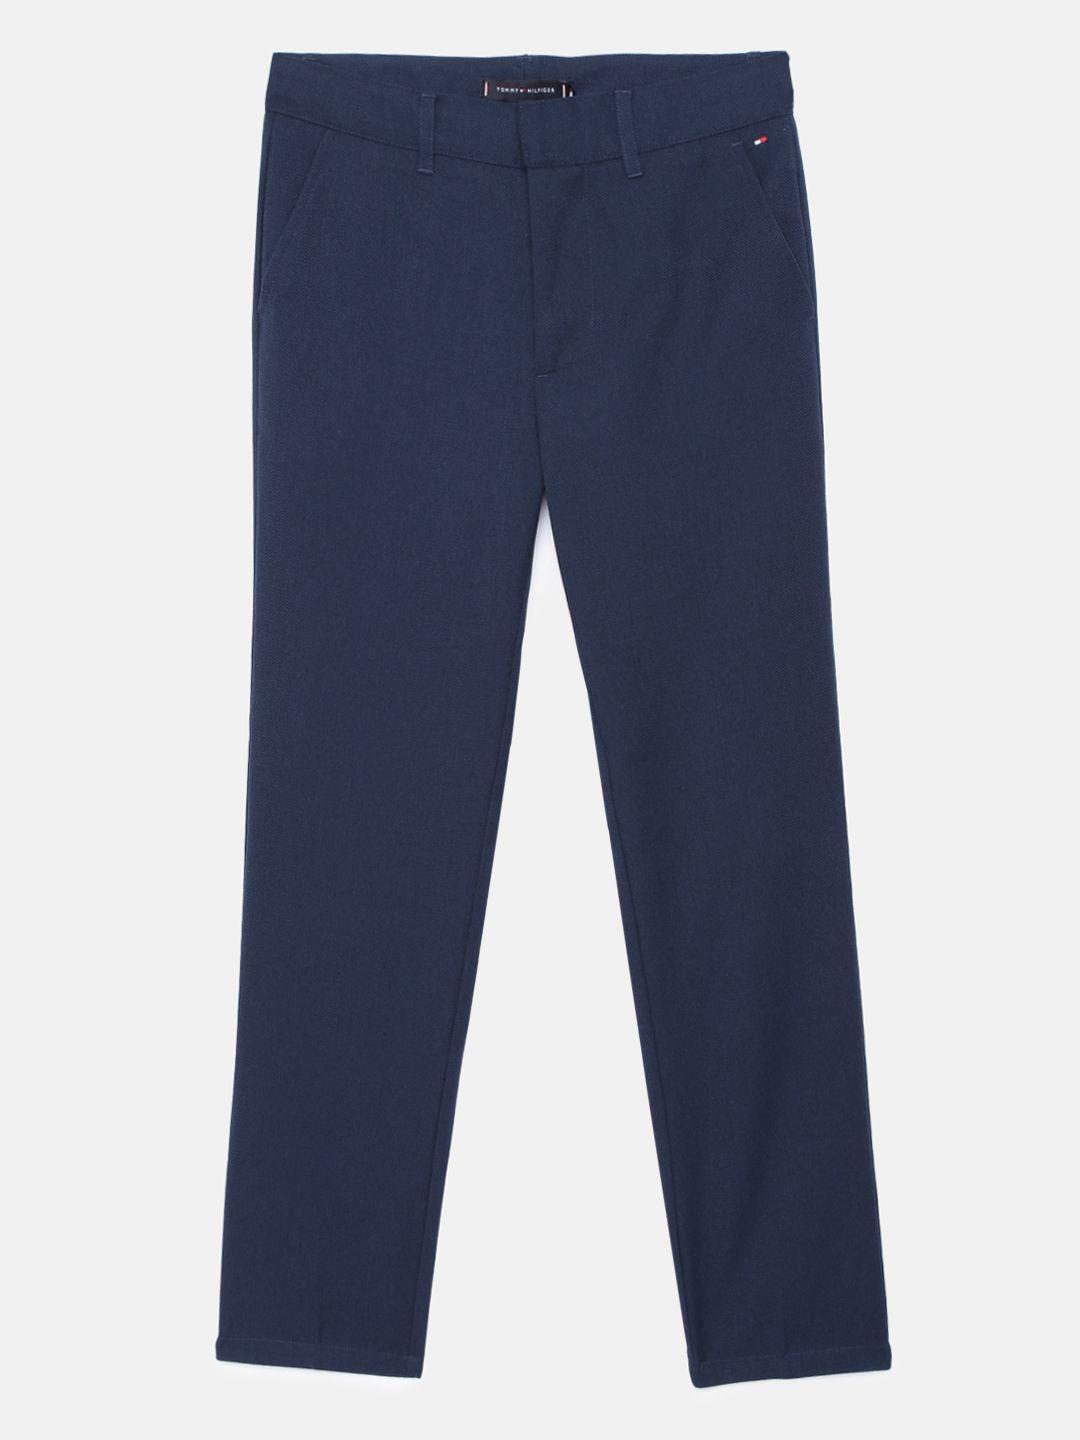 tommy hilfiger boys navy blue chinos trousers